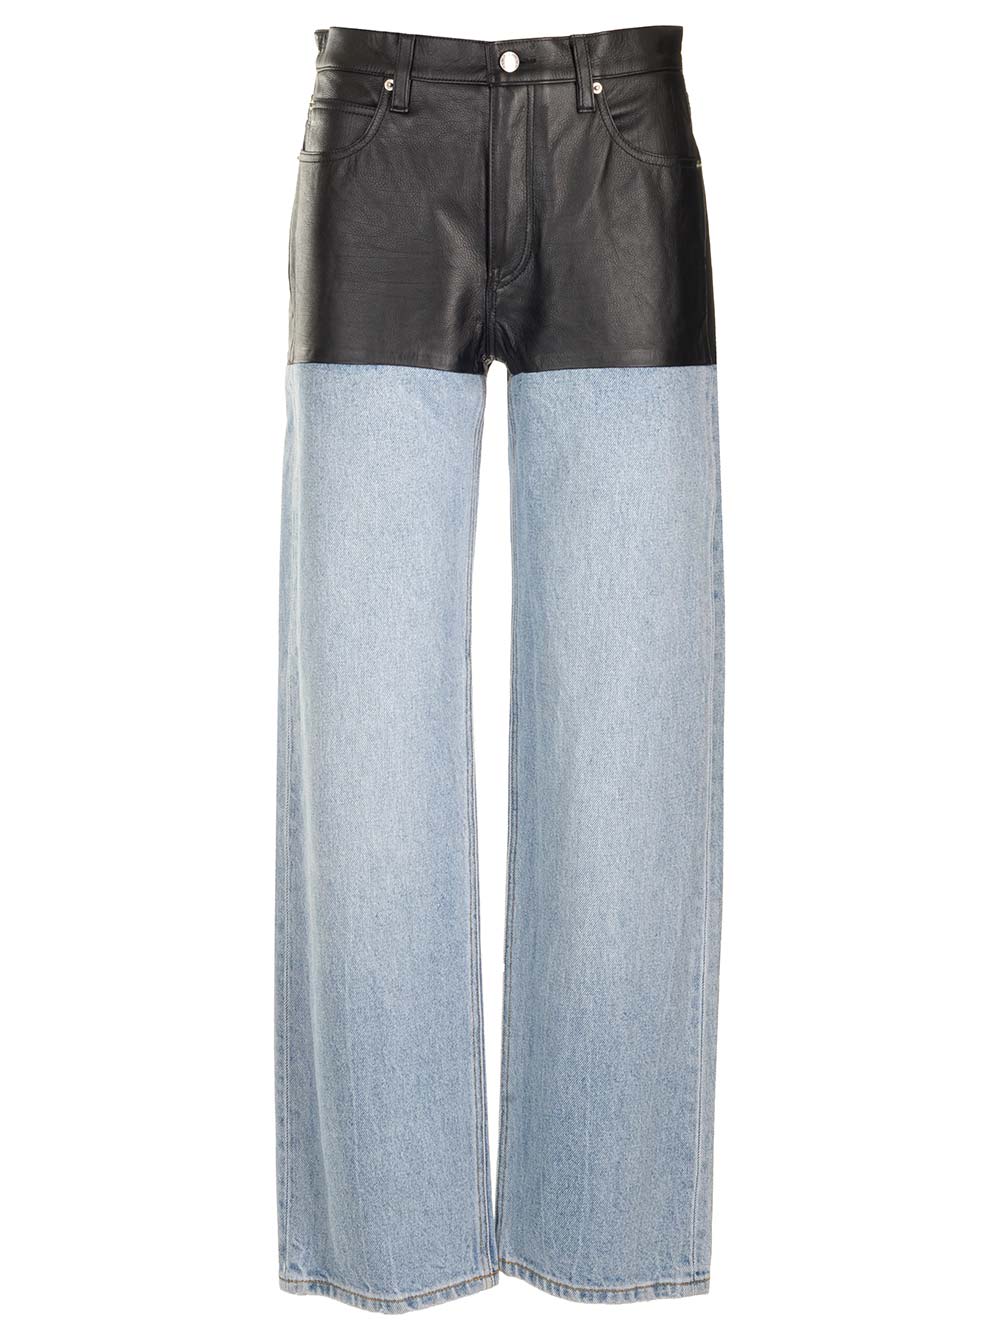 ALEXANDER WANG JEANS WITH LEATHER INSERTS